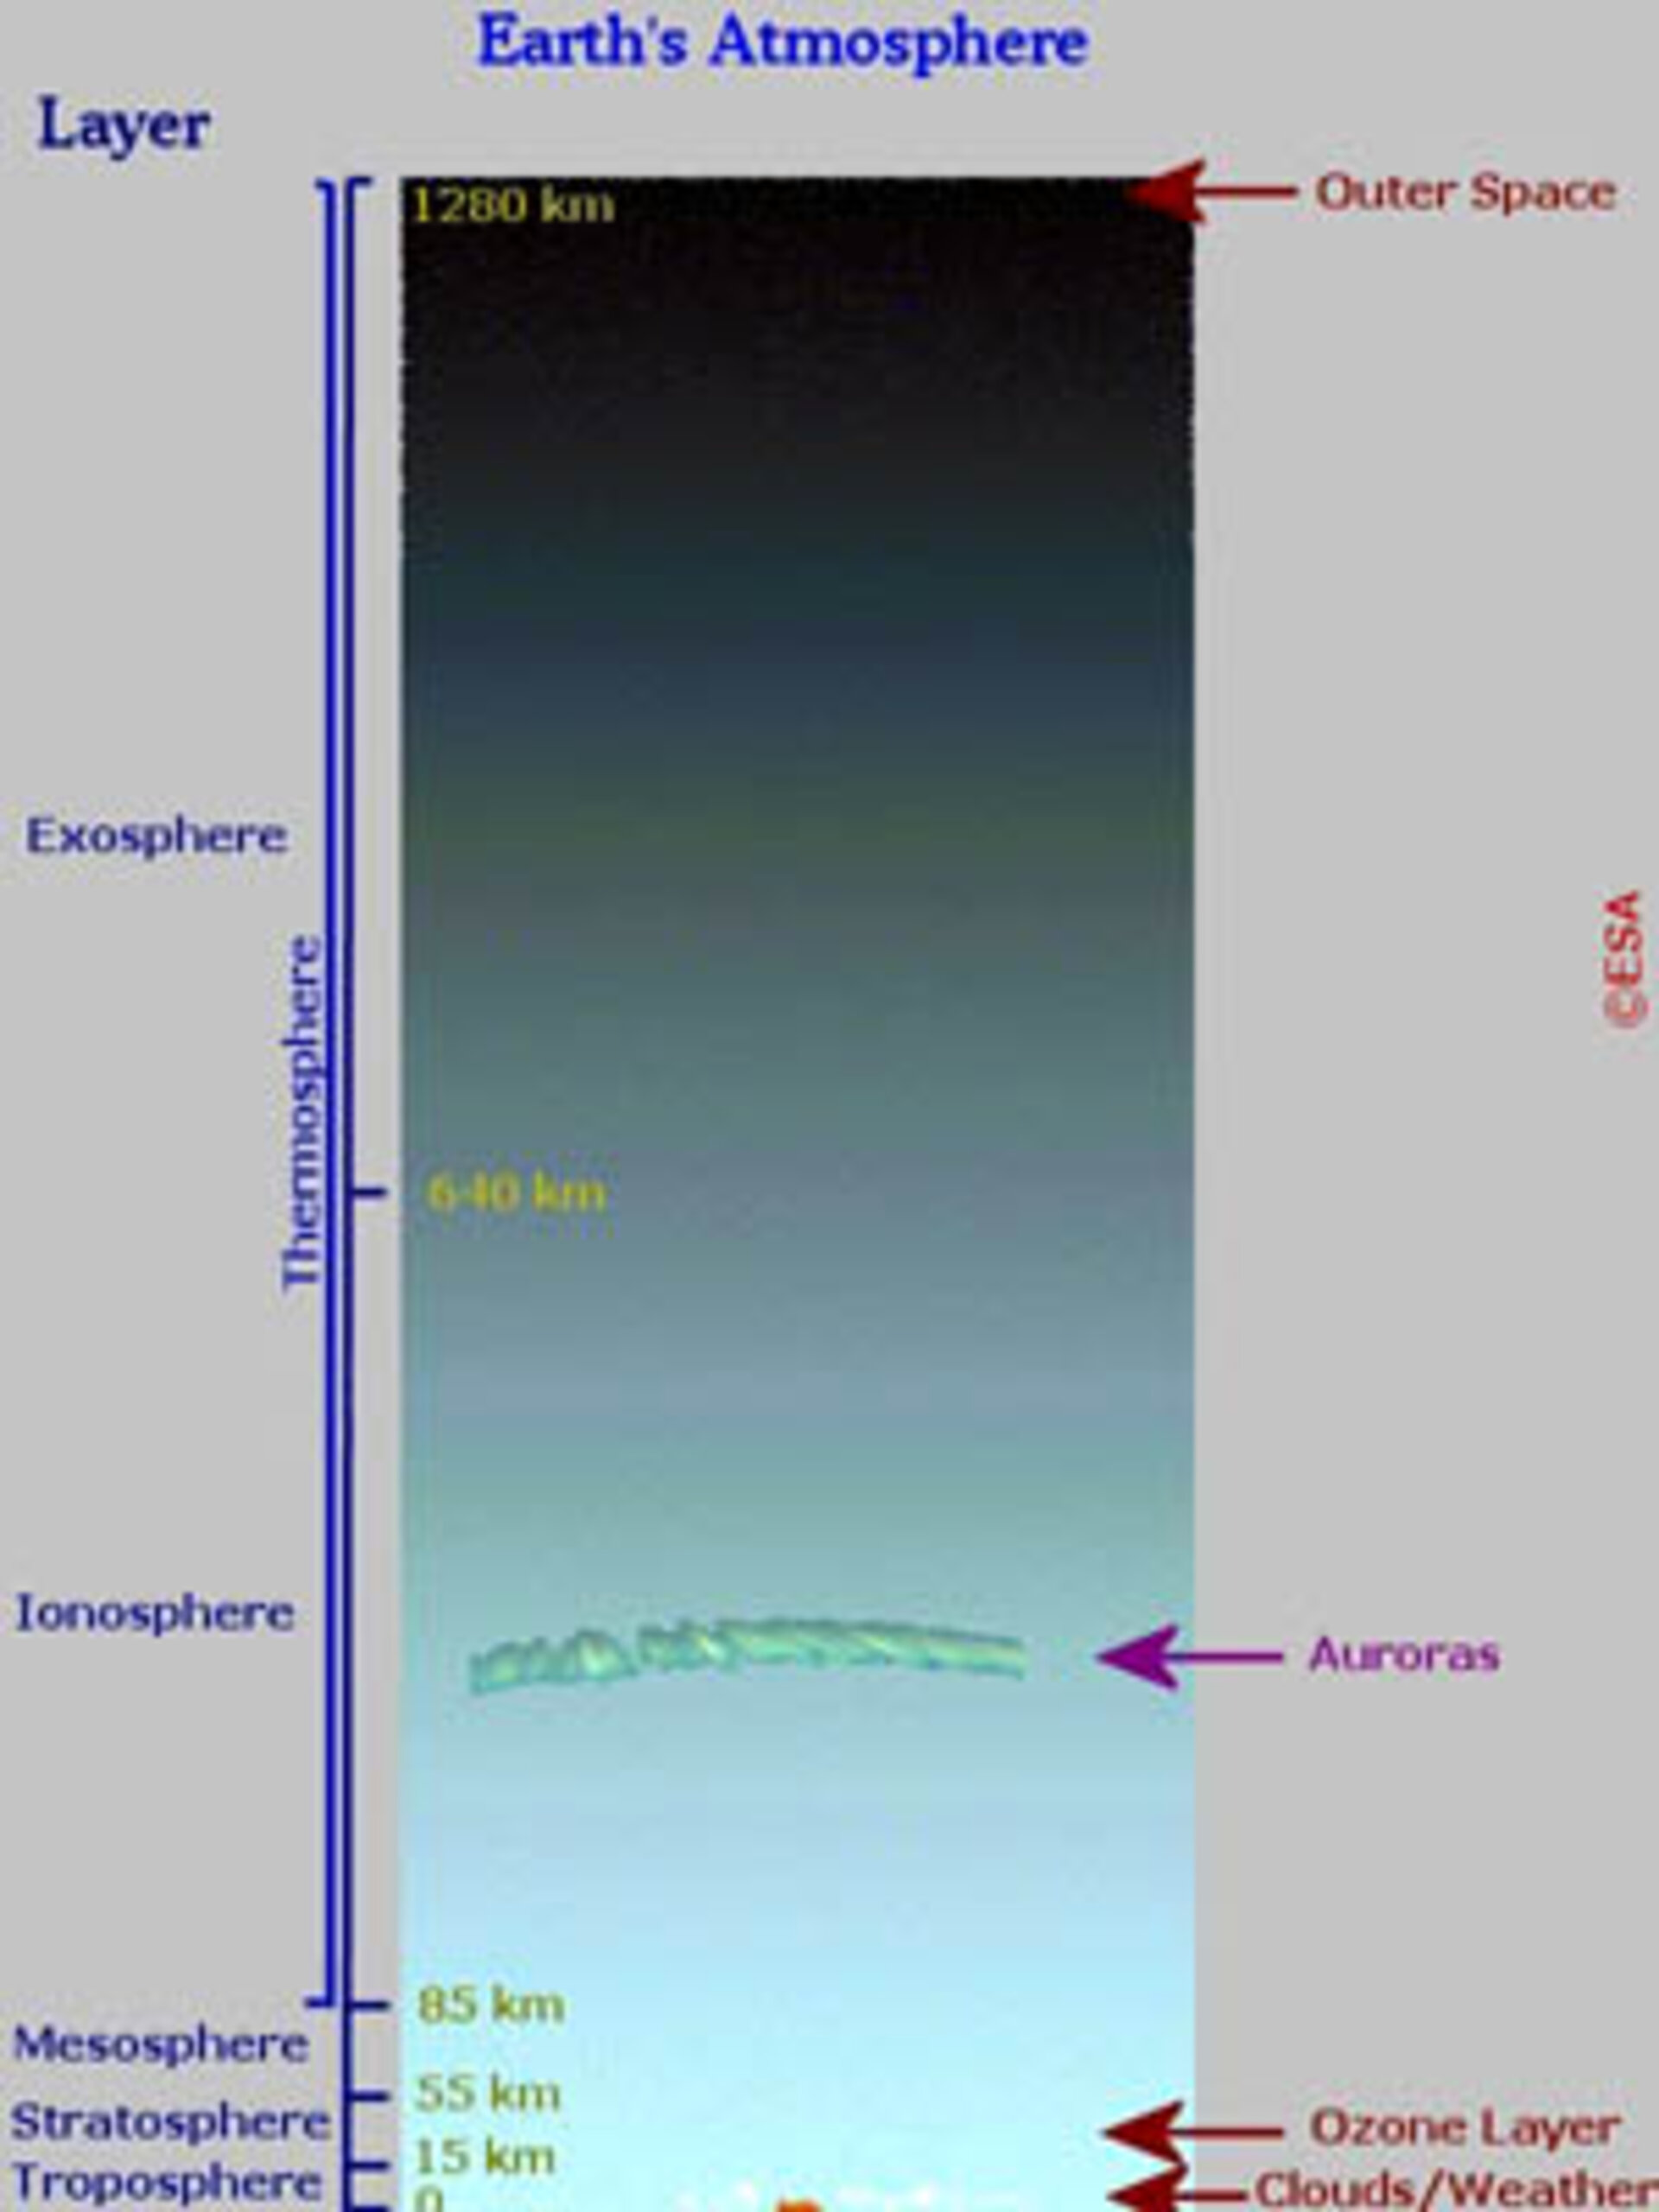 Schematic diagram of the Earth's Atmosphere